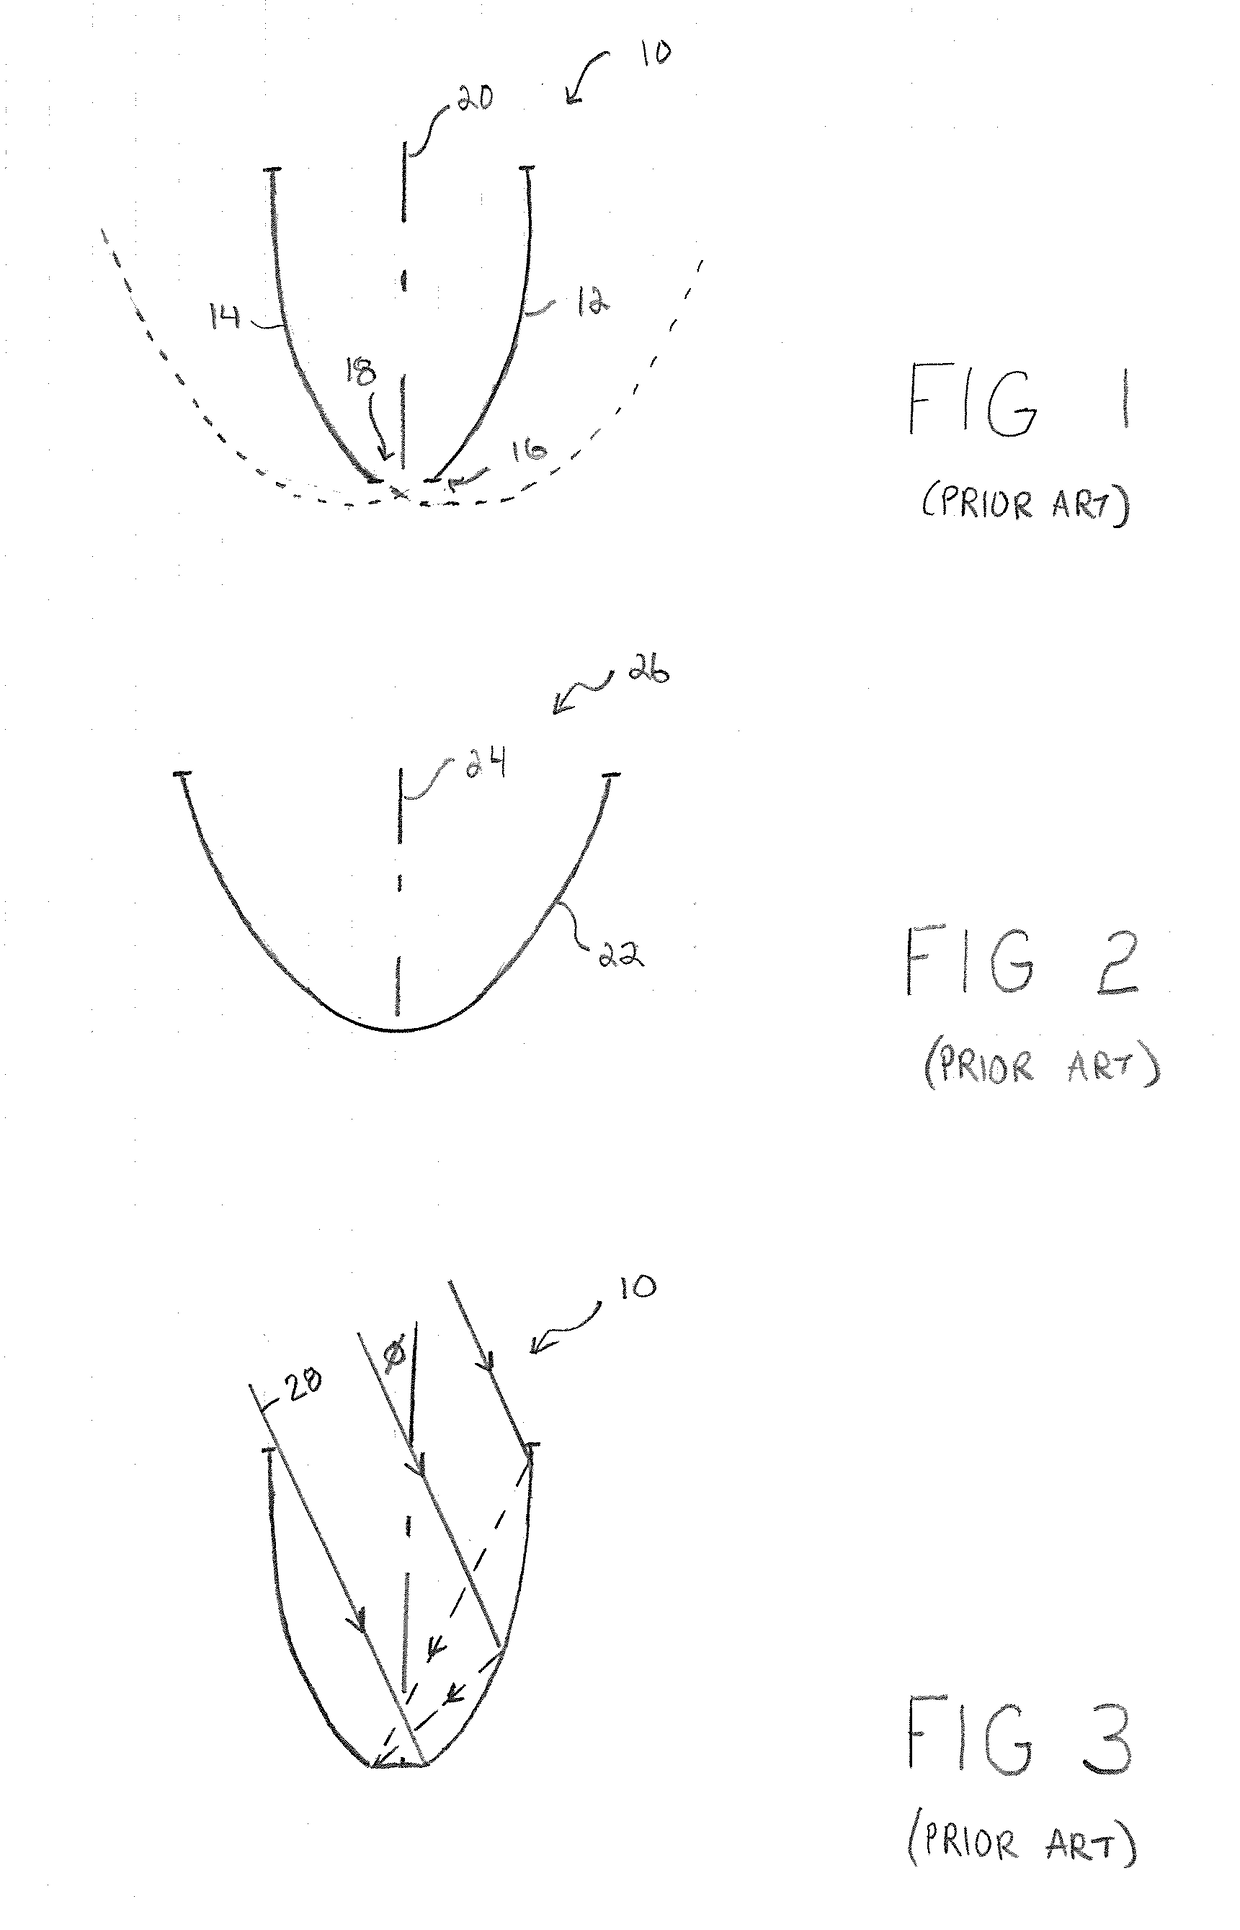 Total internal reflection lens having a straight sidewall entry and a concave spherical exit bounded by a compound parabolic concentrator outer surface to improve color mixing of an LED light source